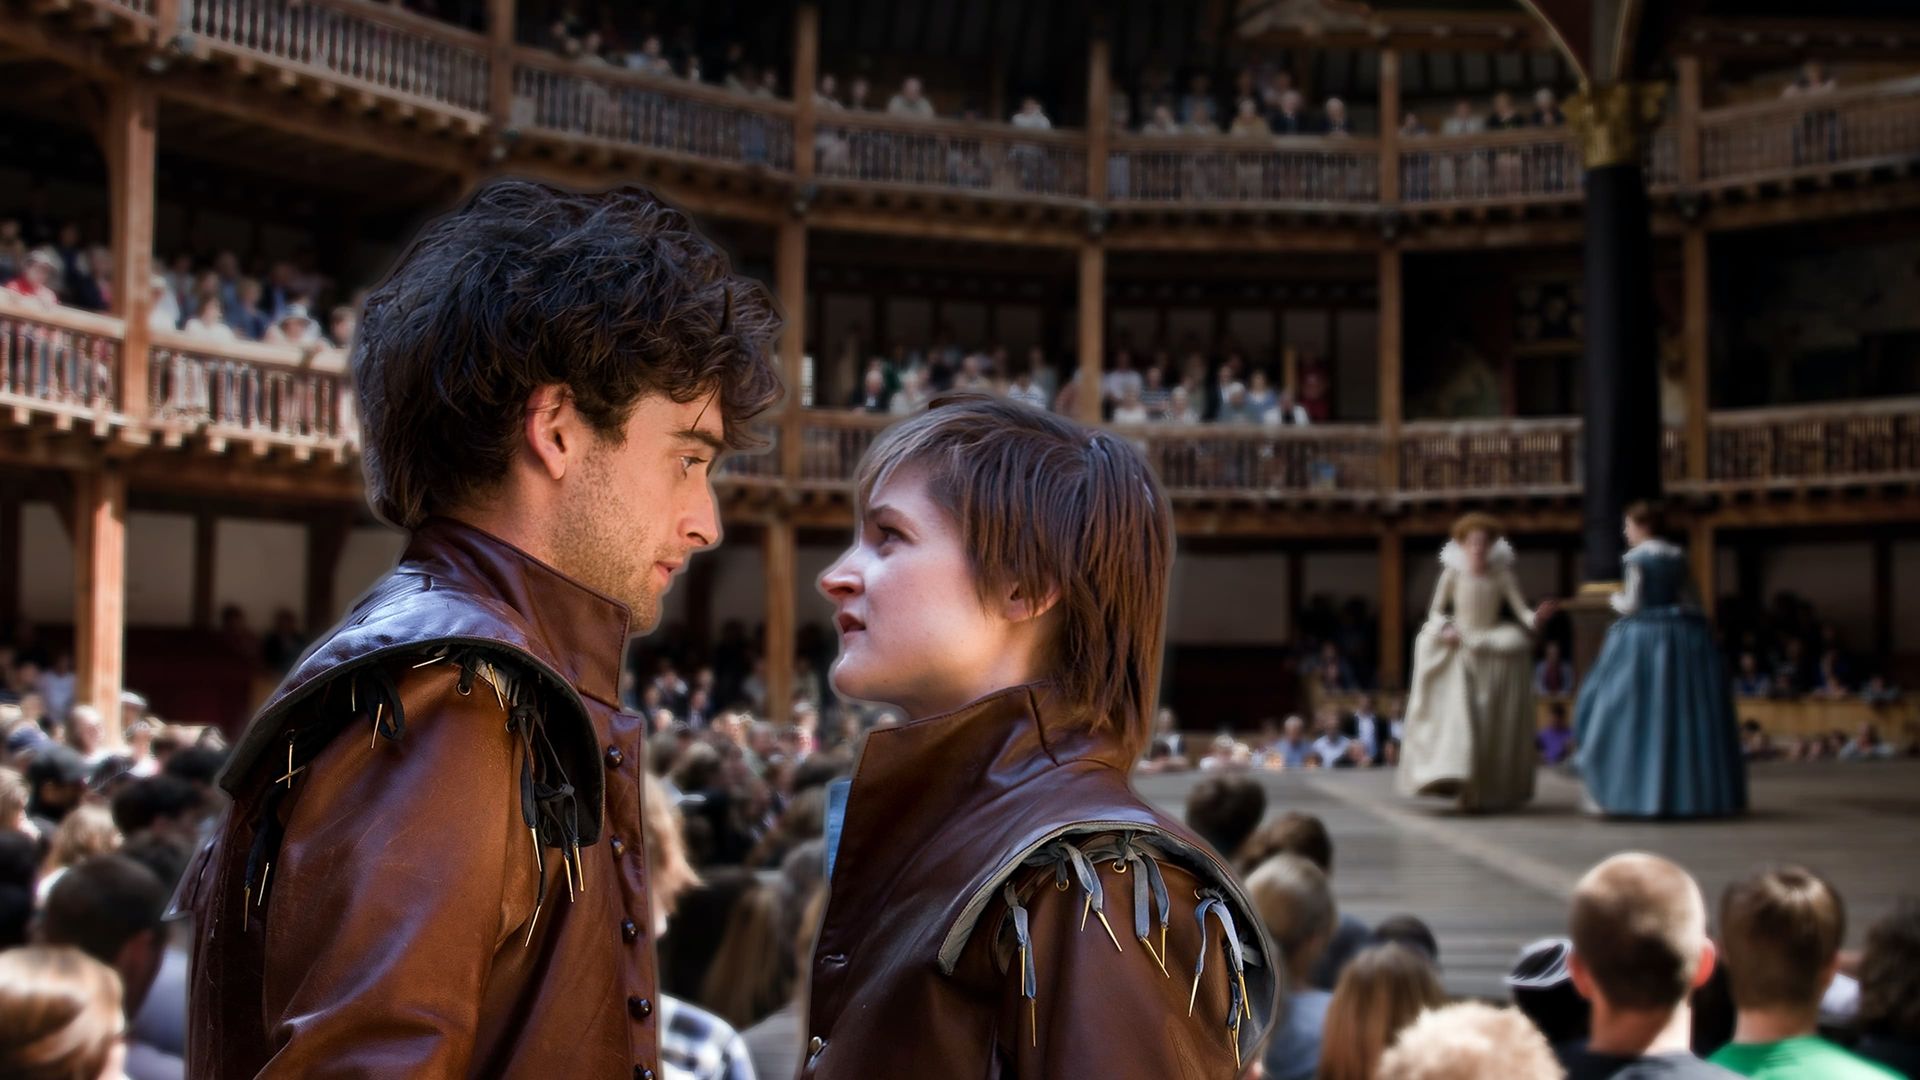 'As You Like It' at Shakespeare's Globe Theatre background